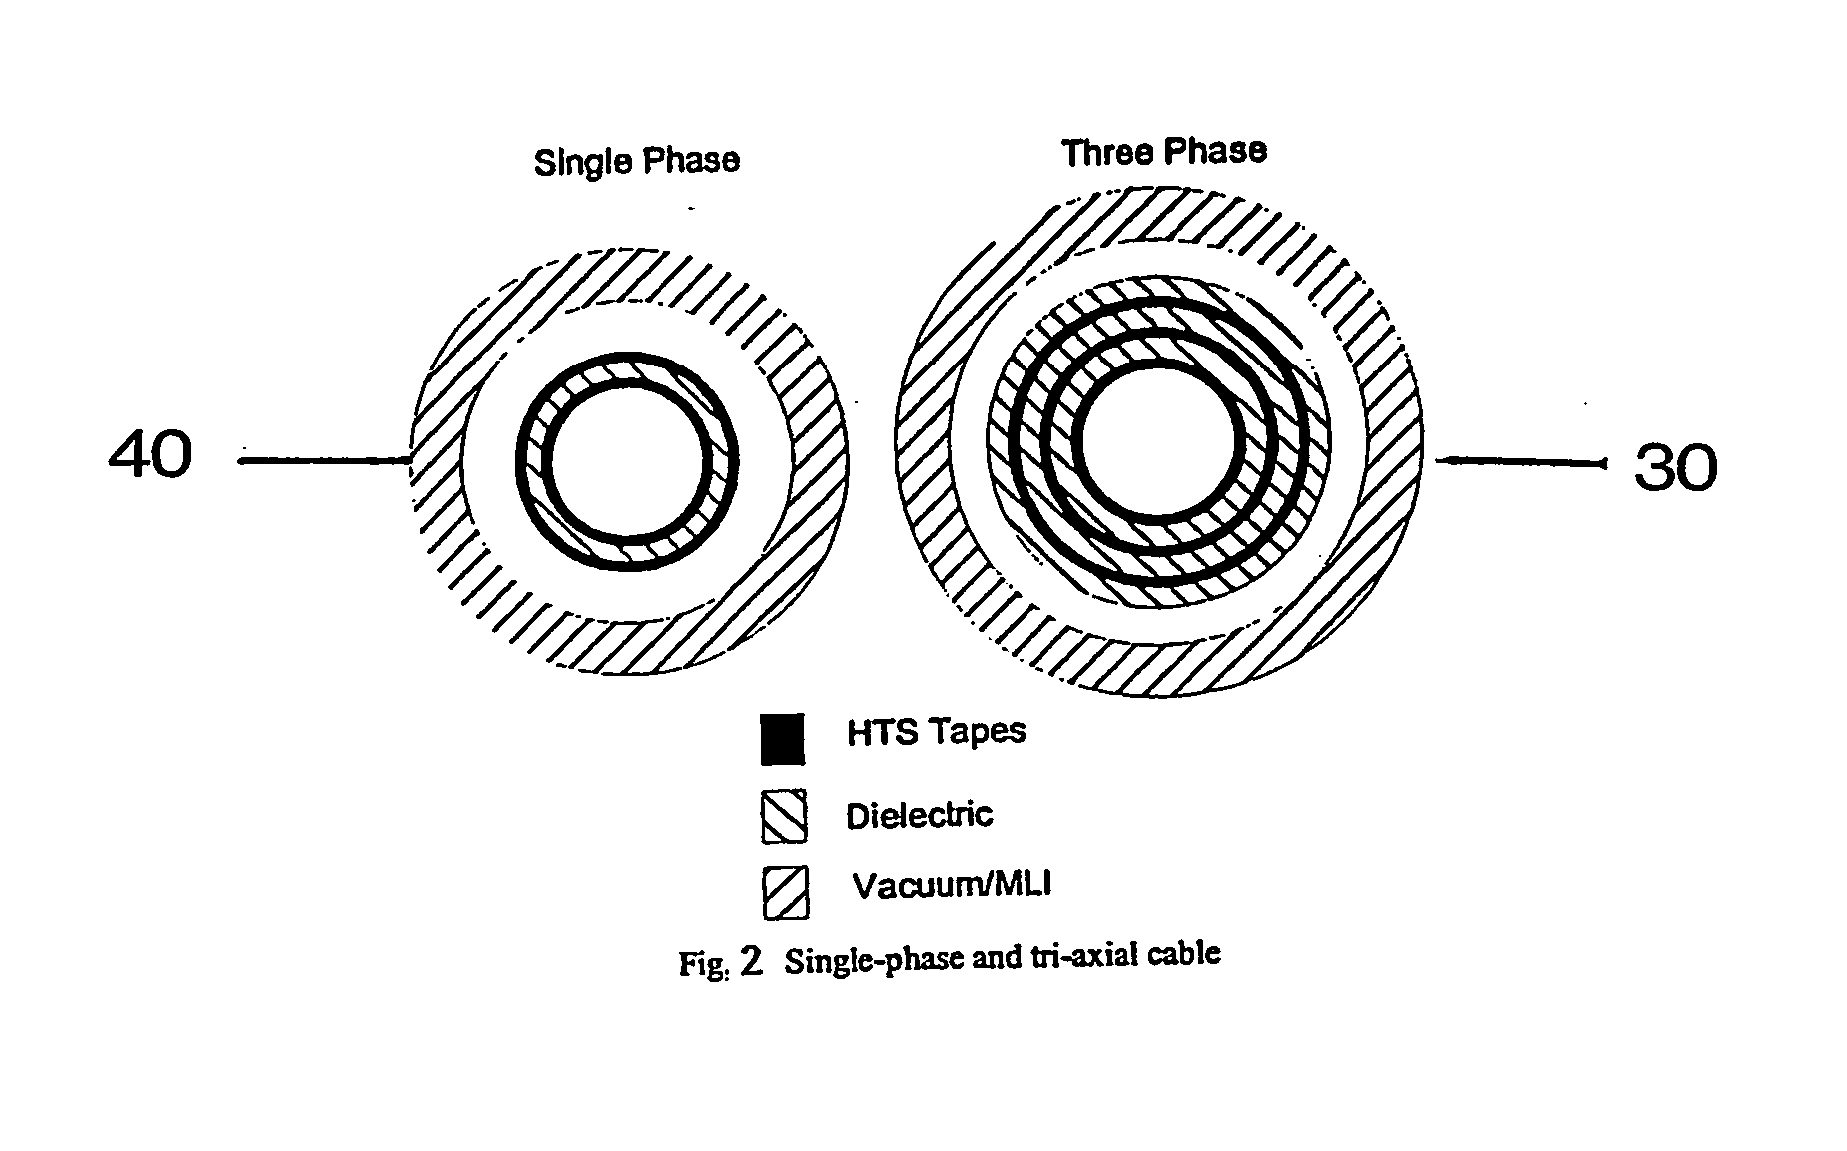 Triaxial hts cable